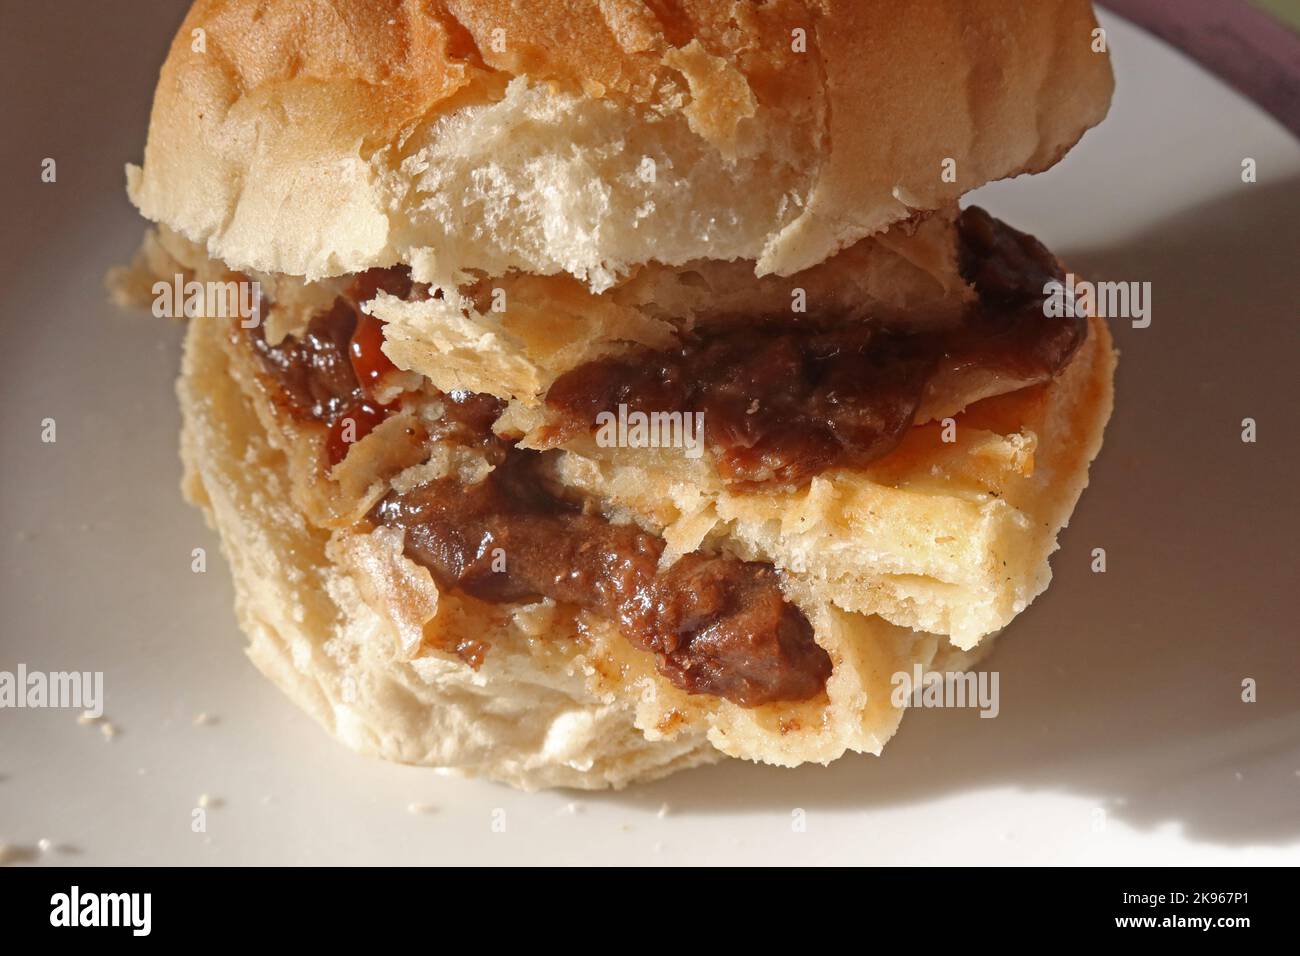 Wigan Lancashire Pie Burger, a steak or Meat pie on a oven bottom muffin Stock Photo